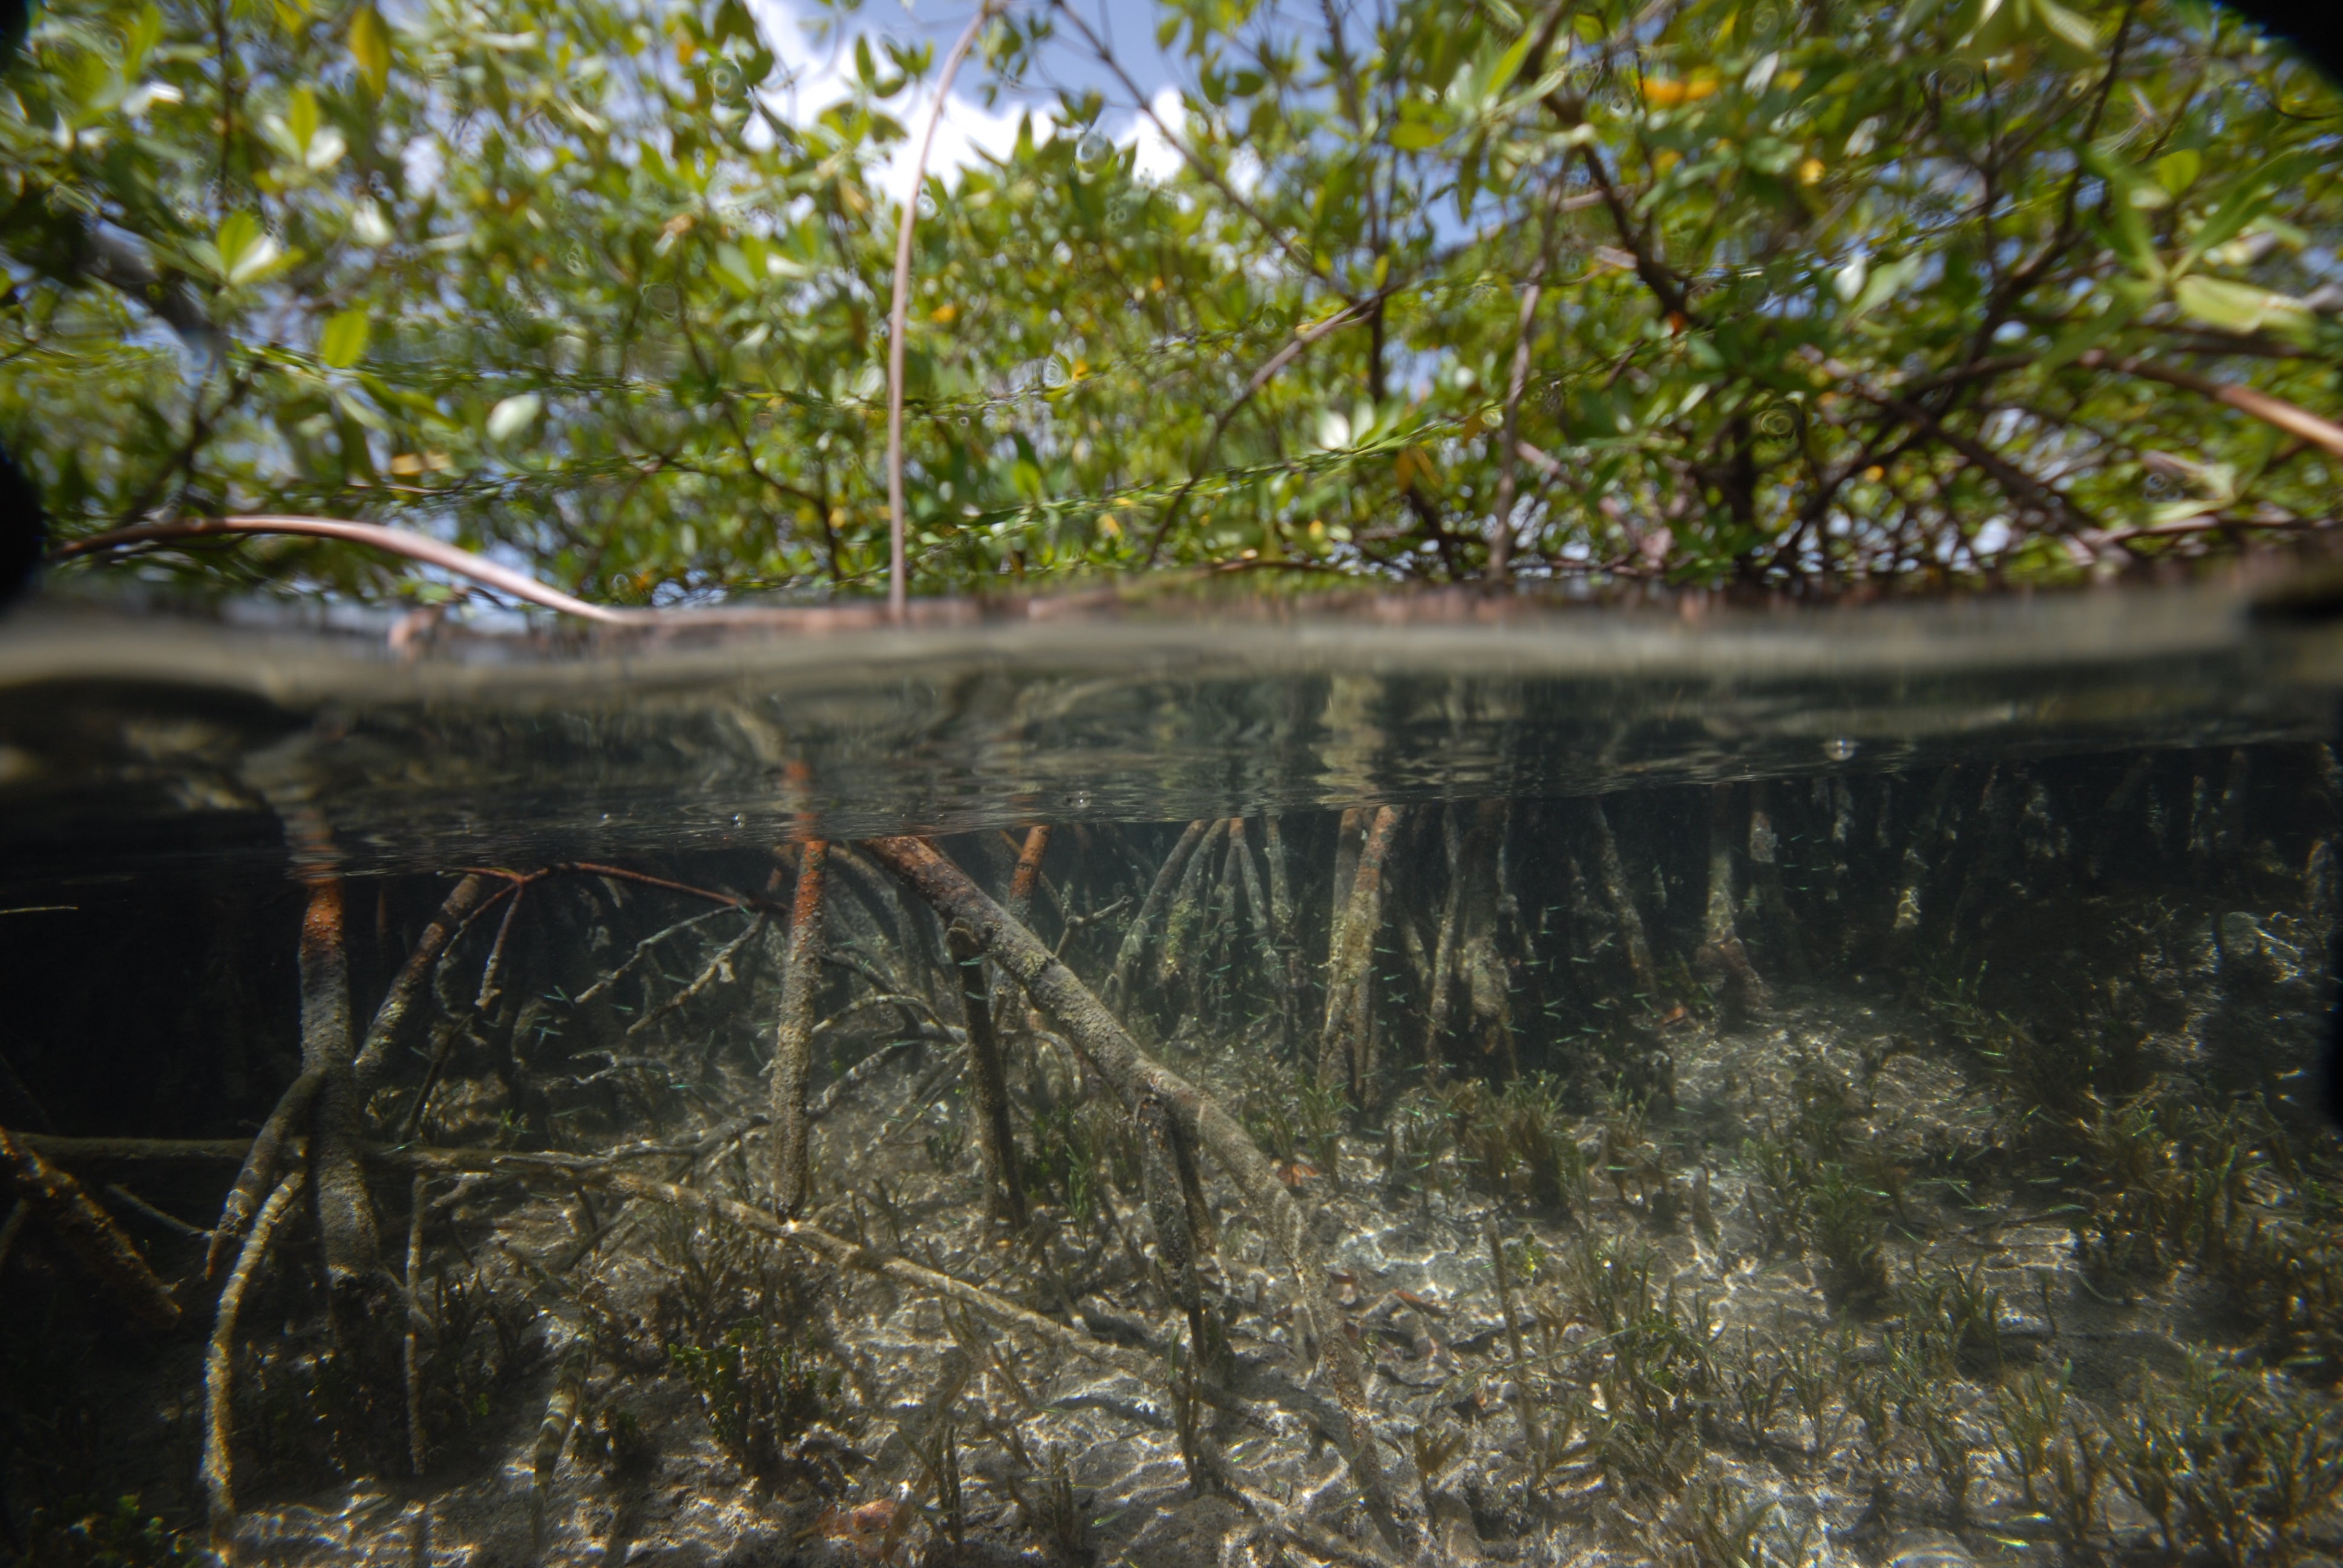 T. magnifica's habitat: a marine mangrove swamp in Guadeloupe. (Photo: Pierre Yves Pascal)